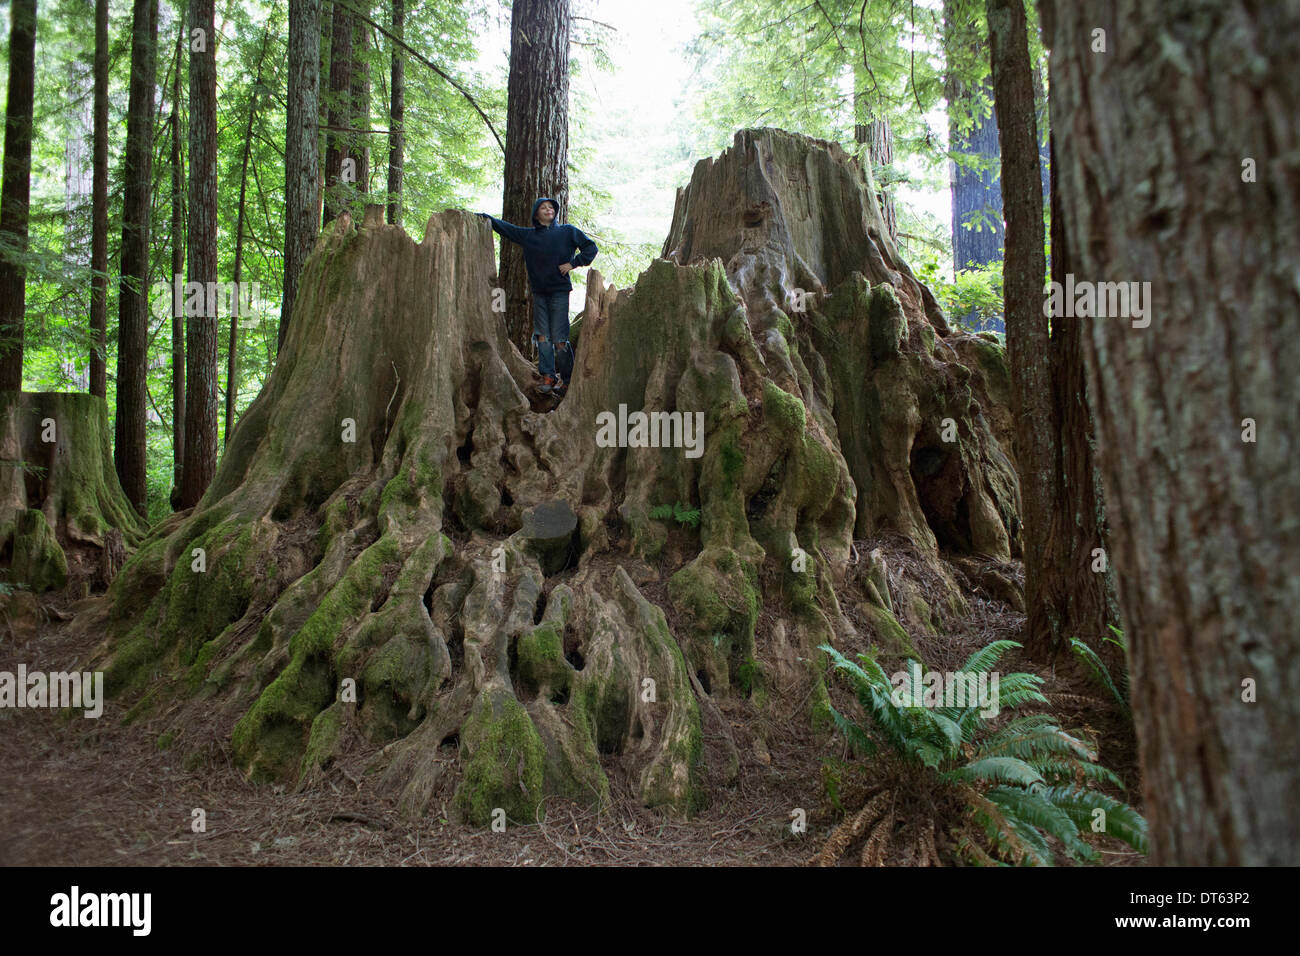 Boy standing on tree stump, Redwoods National Park, California, USA Banque D'Images